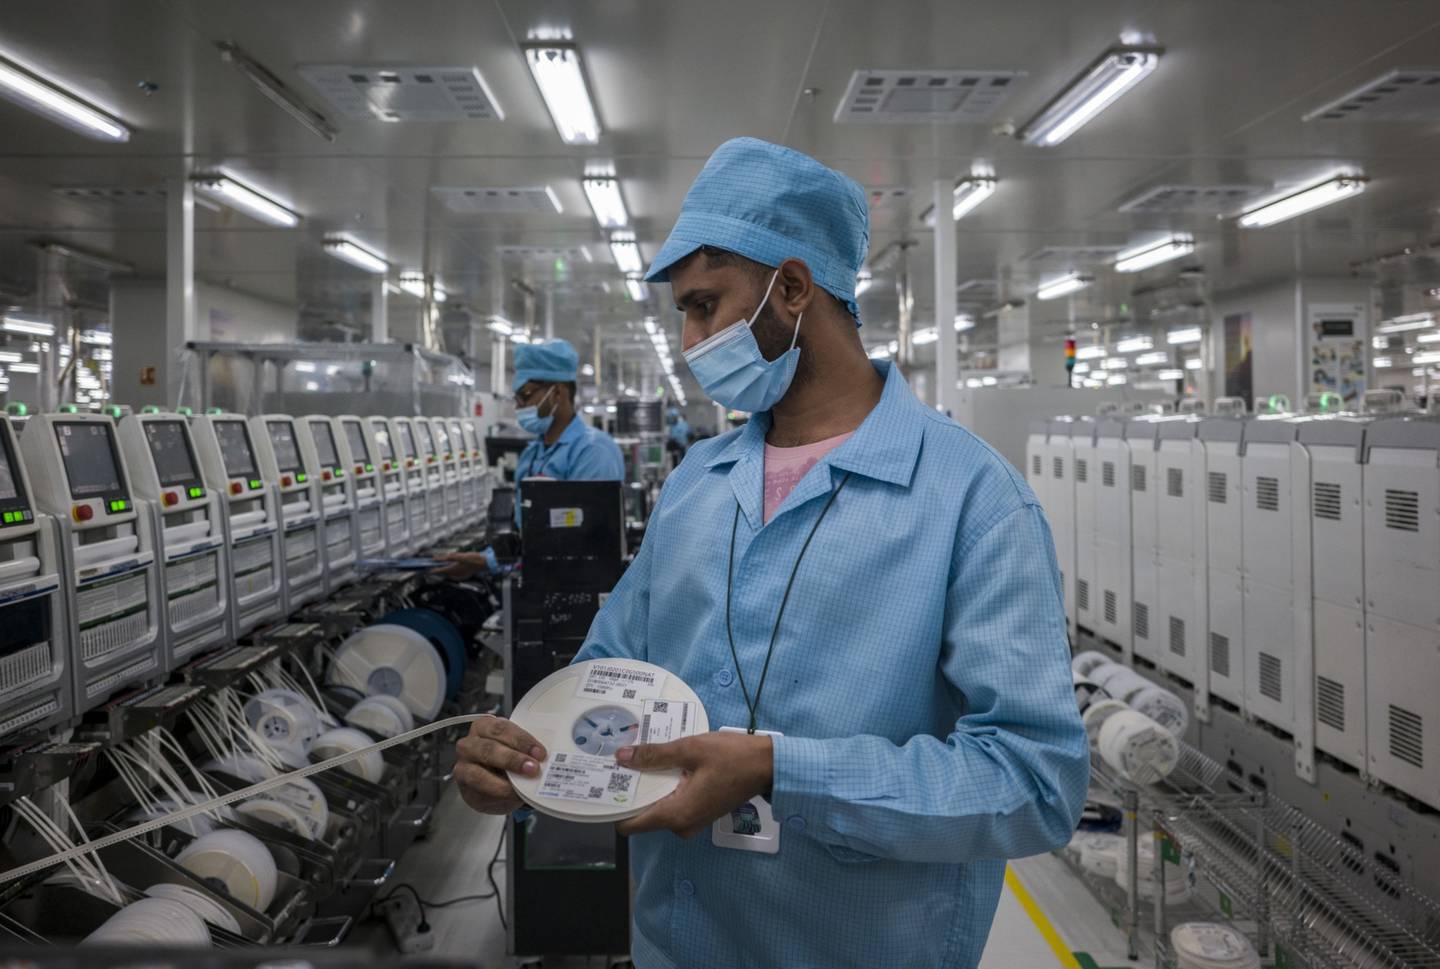 Workers at Samsung's surface mount technology workshop inside the Realme factory in Greater Noida, India. Bloomberg